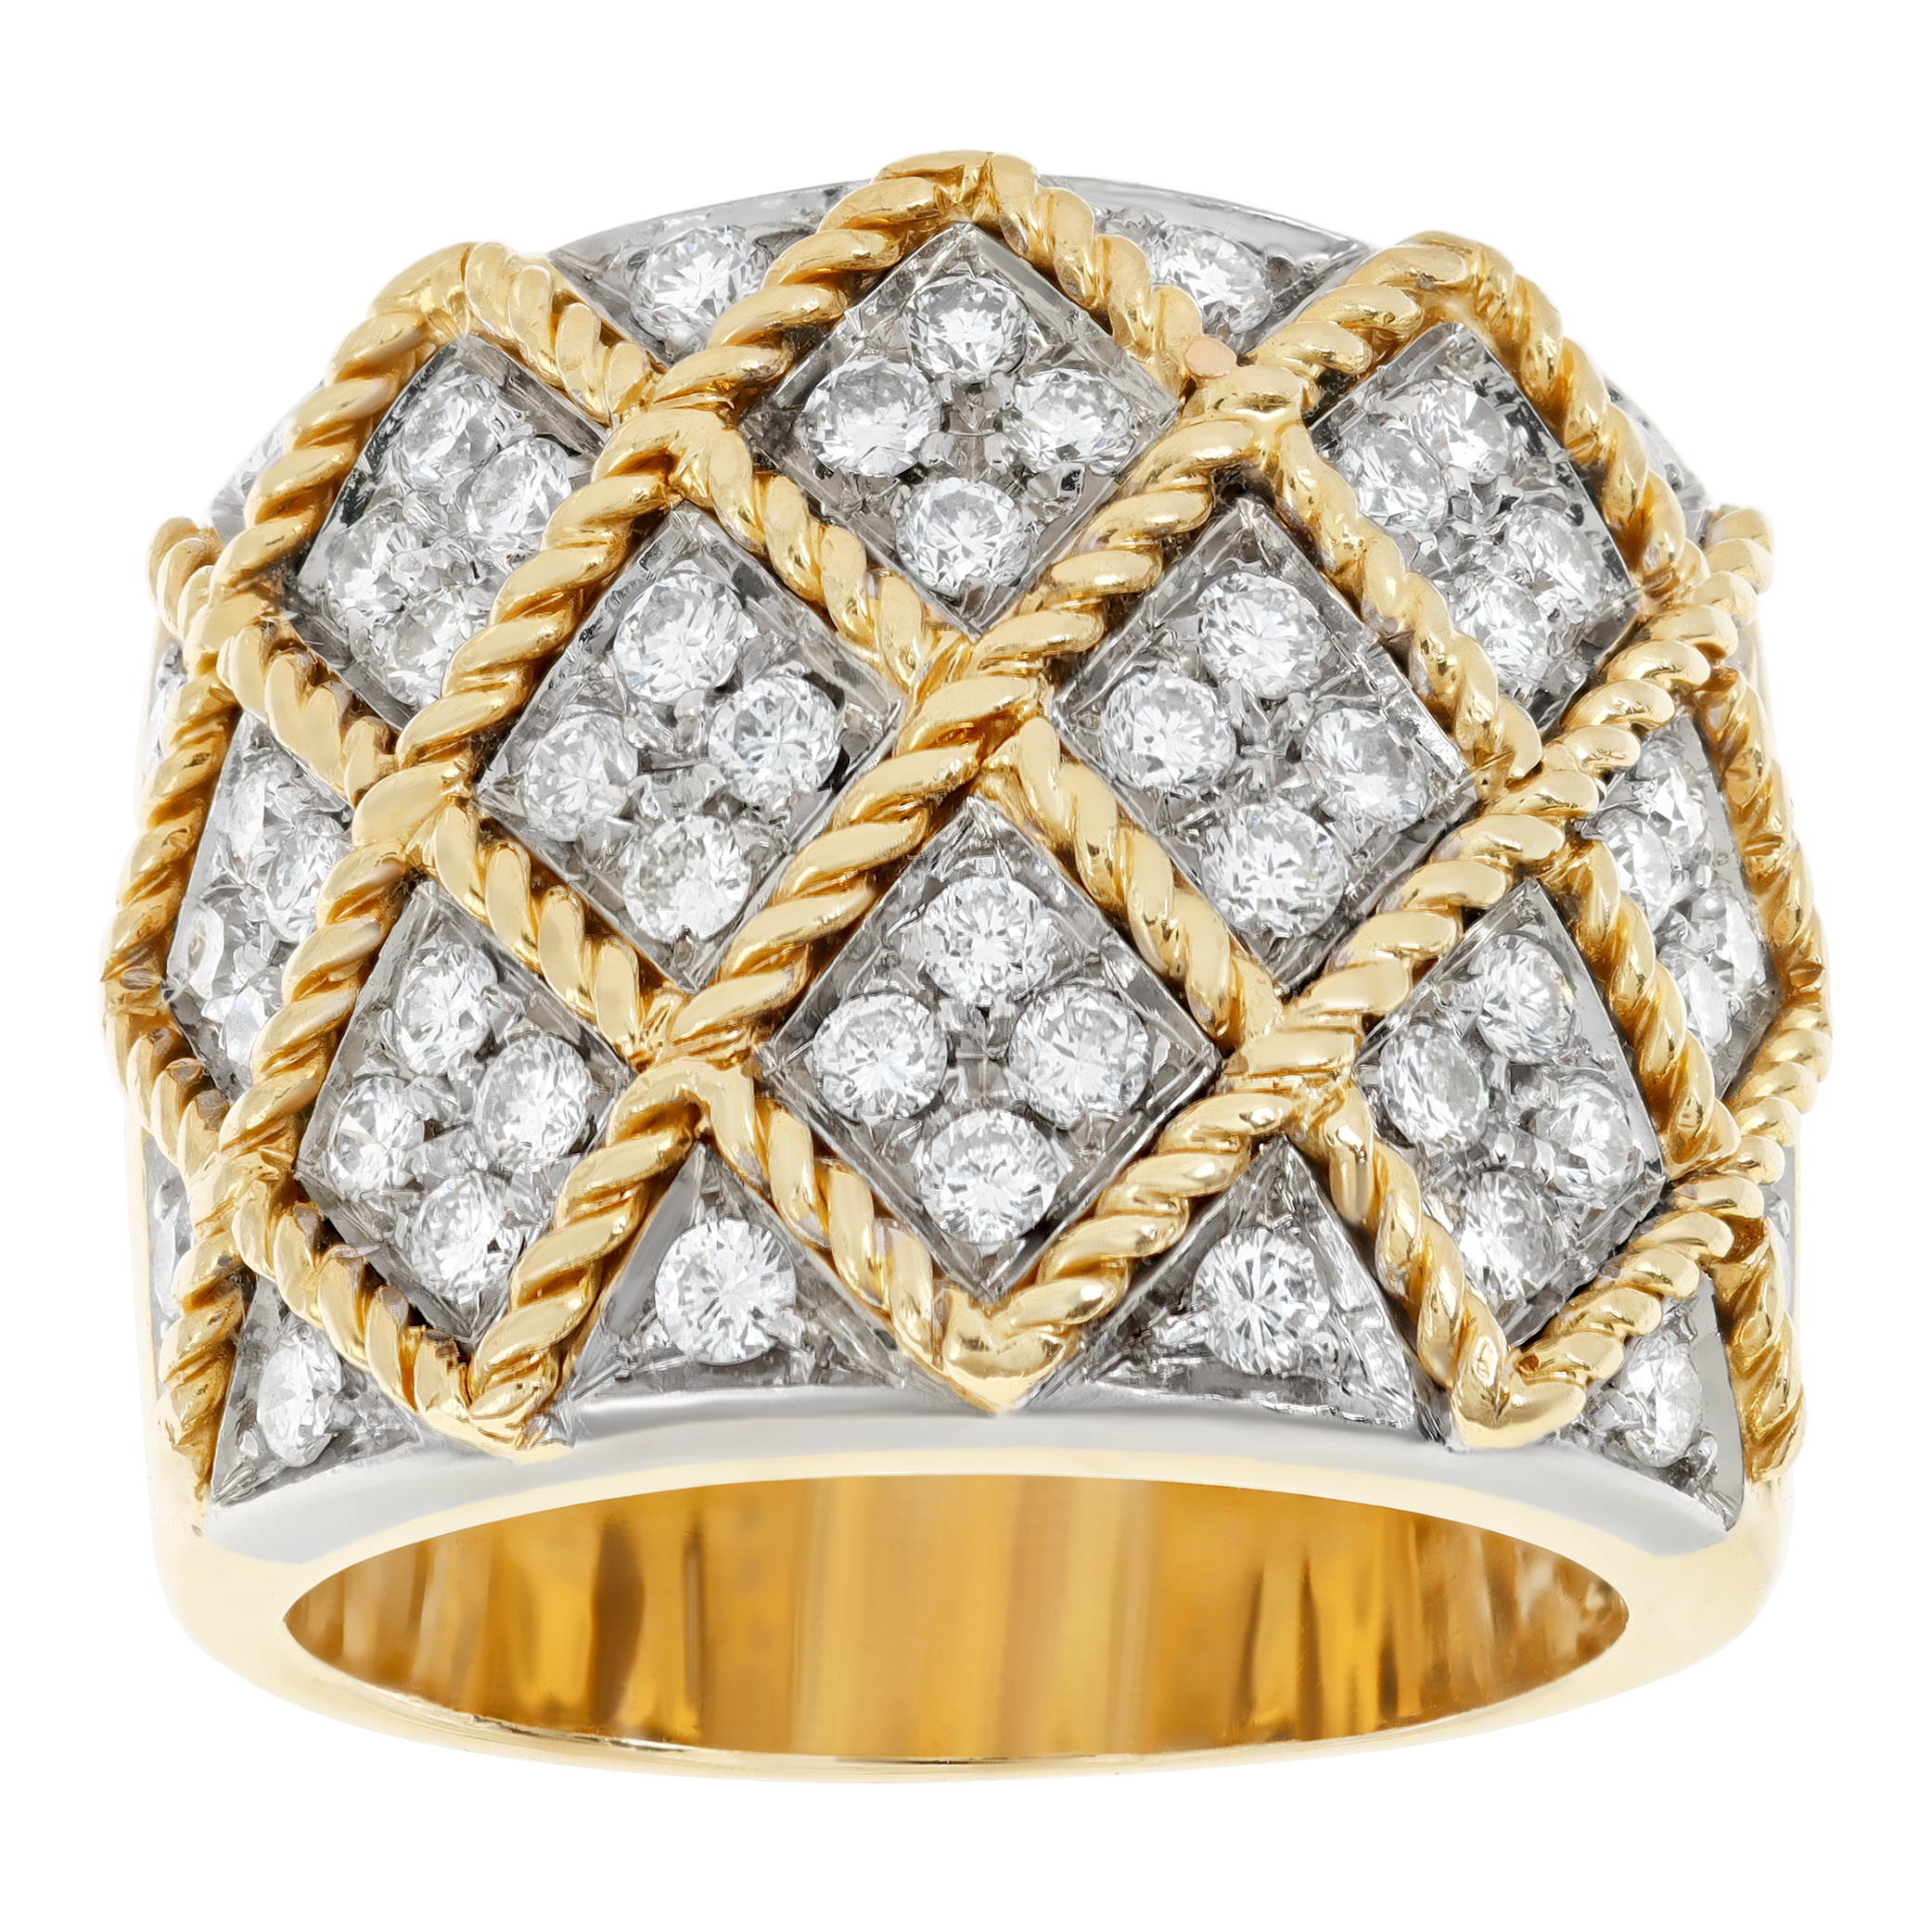 Vintage Made in Italy wide diamonds ring in 18K yellow gold. Round brilliant cut diamonds total approx. weight: 1.04 carats (Stones)